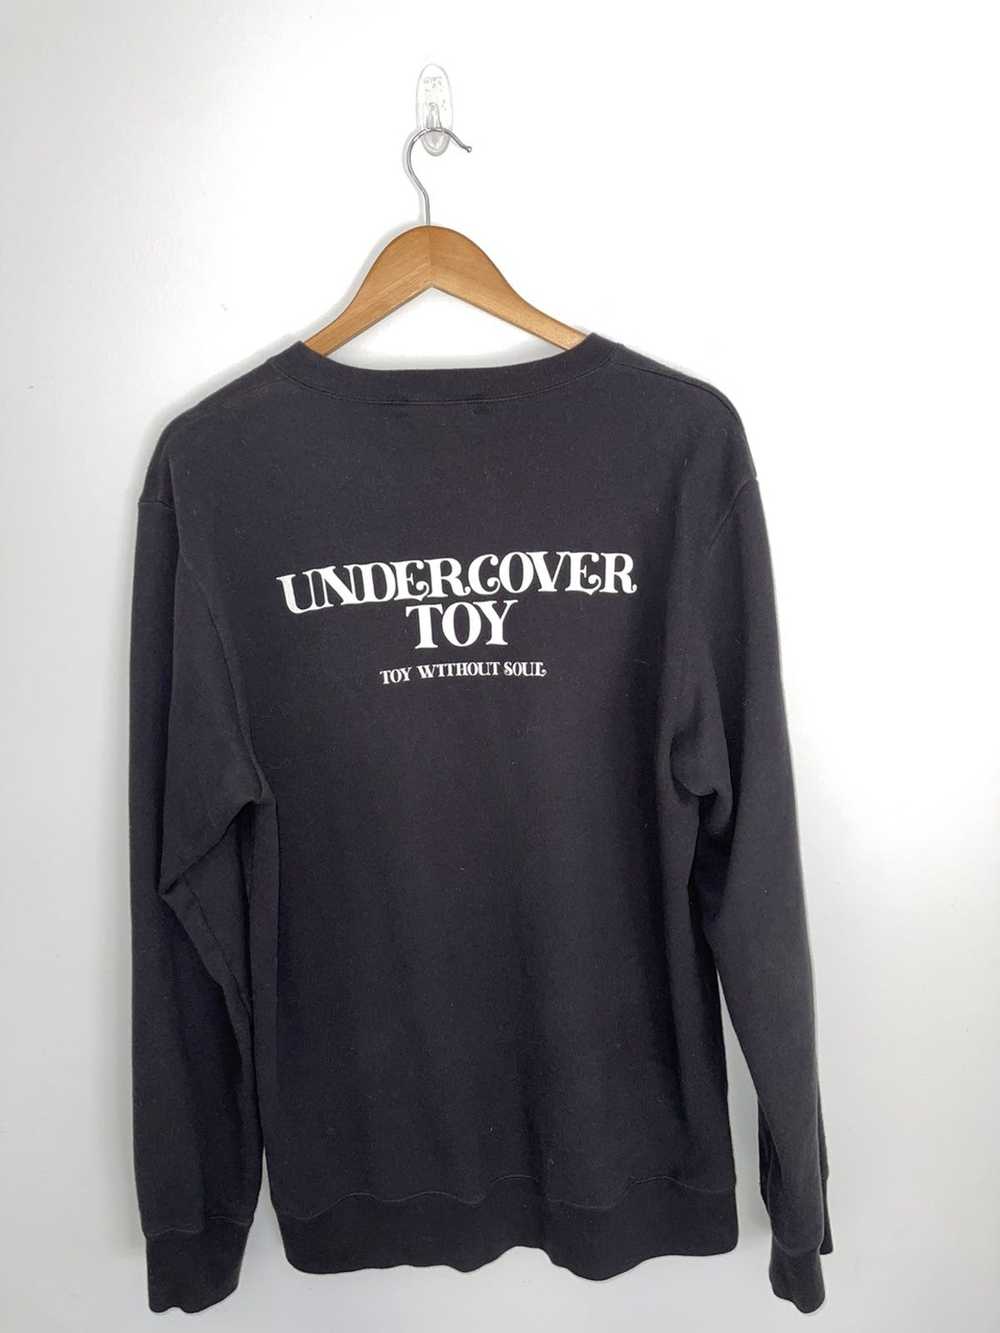 Undercover Undercover Bear sweater - image 3